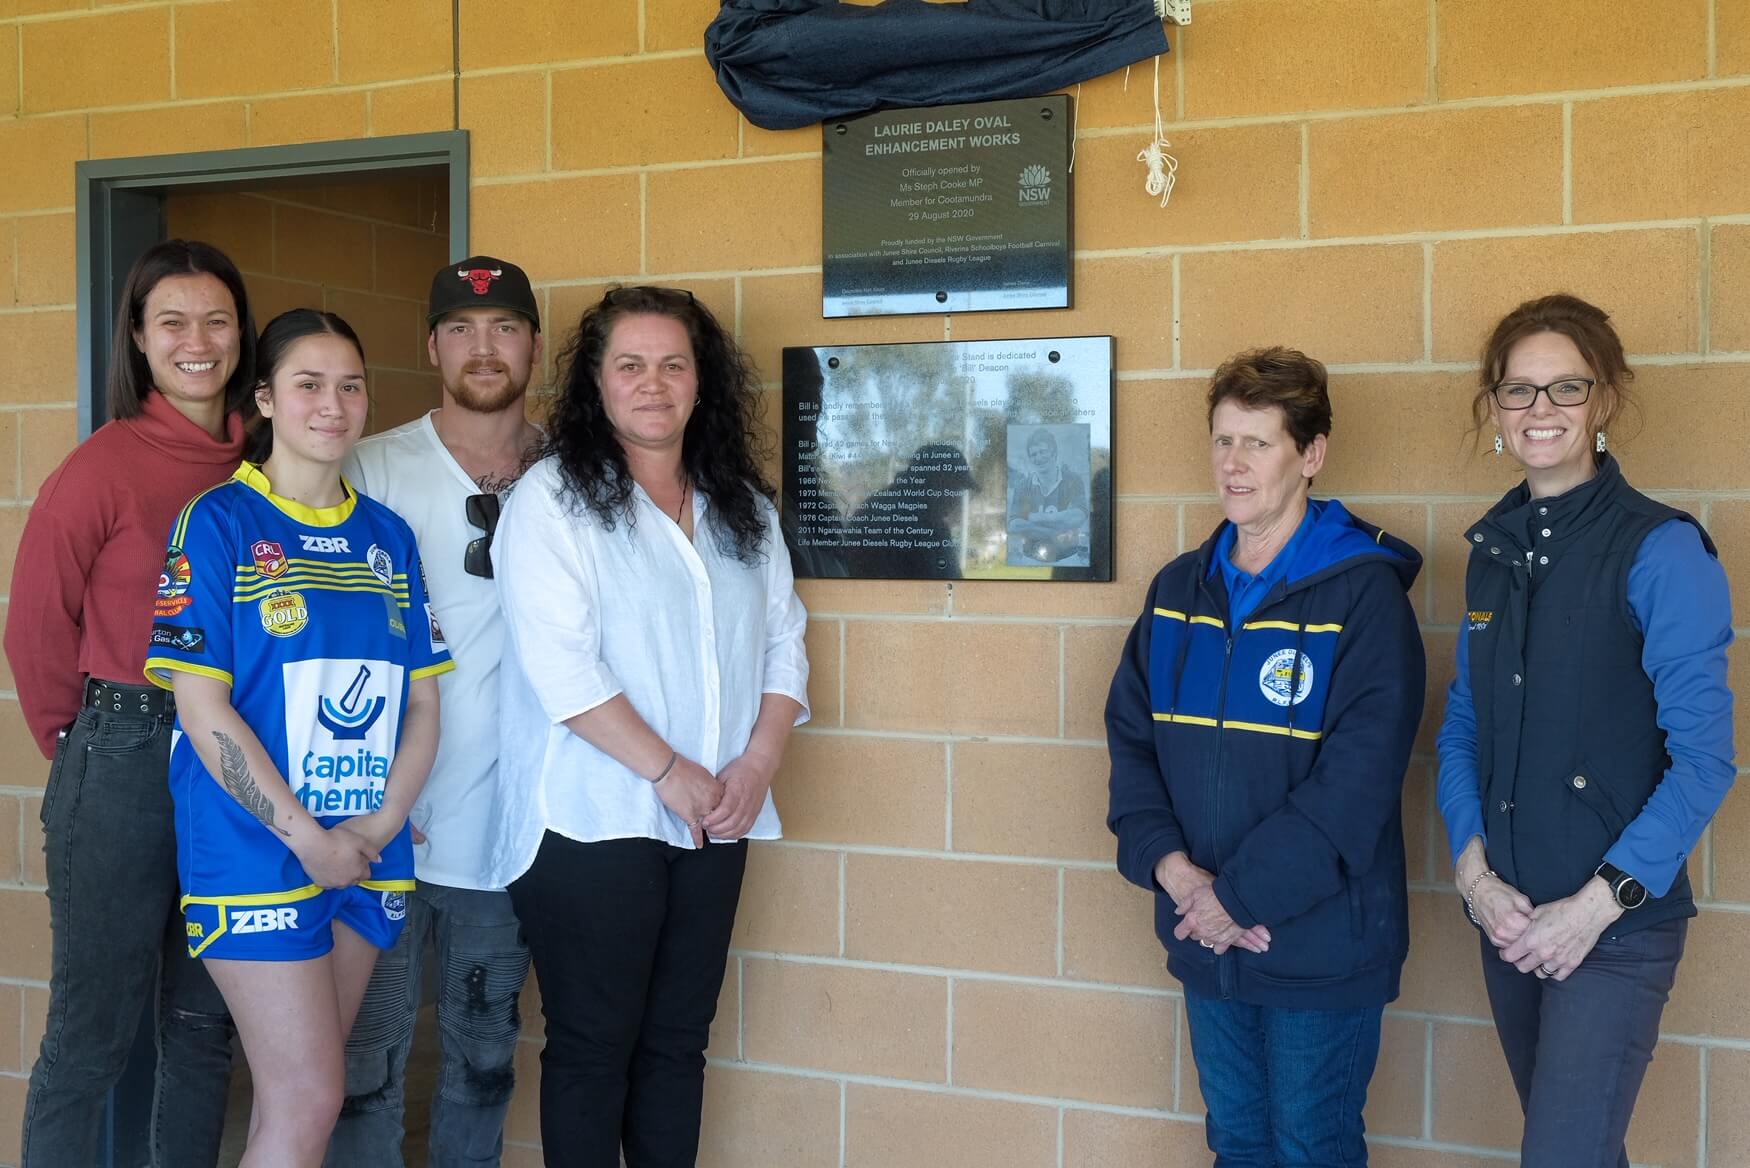 Billie Deacon, Maddy Deacon, Matt Logan, Lyandra Logan, Noreen Deacon and Steph Cooke MP in front of a brand new plaque on the new amenities building.